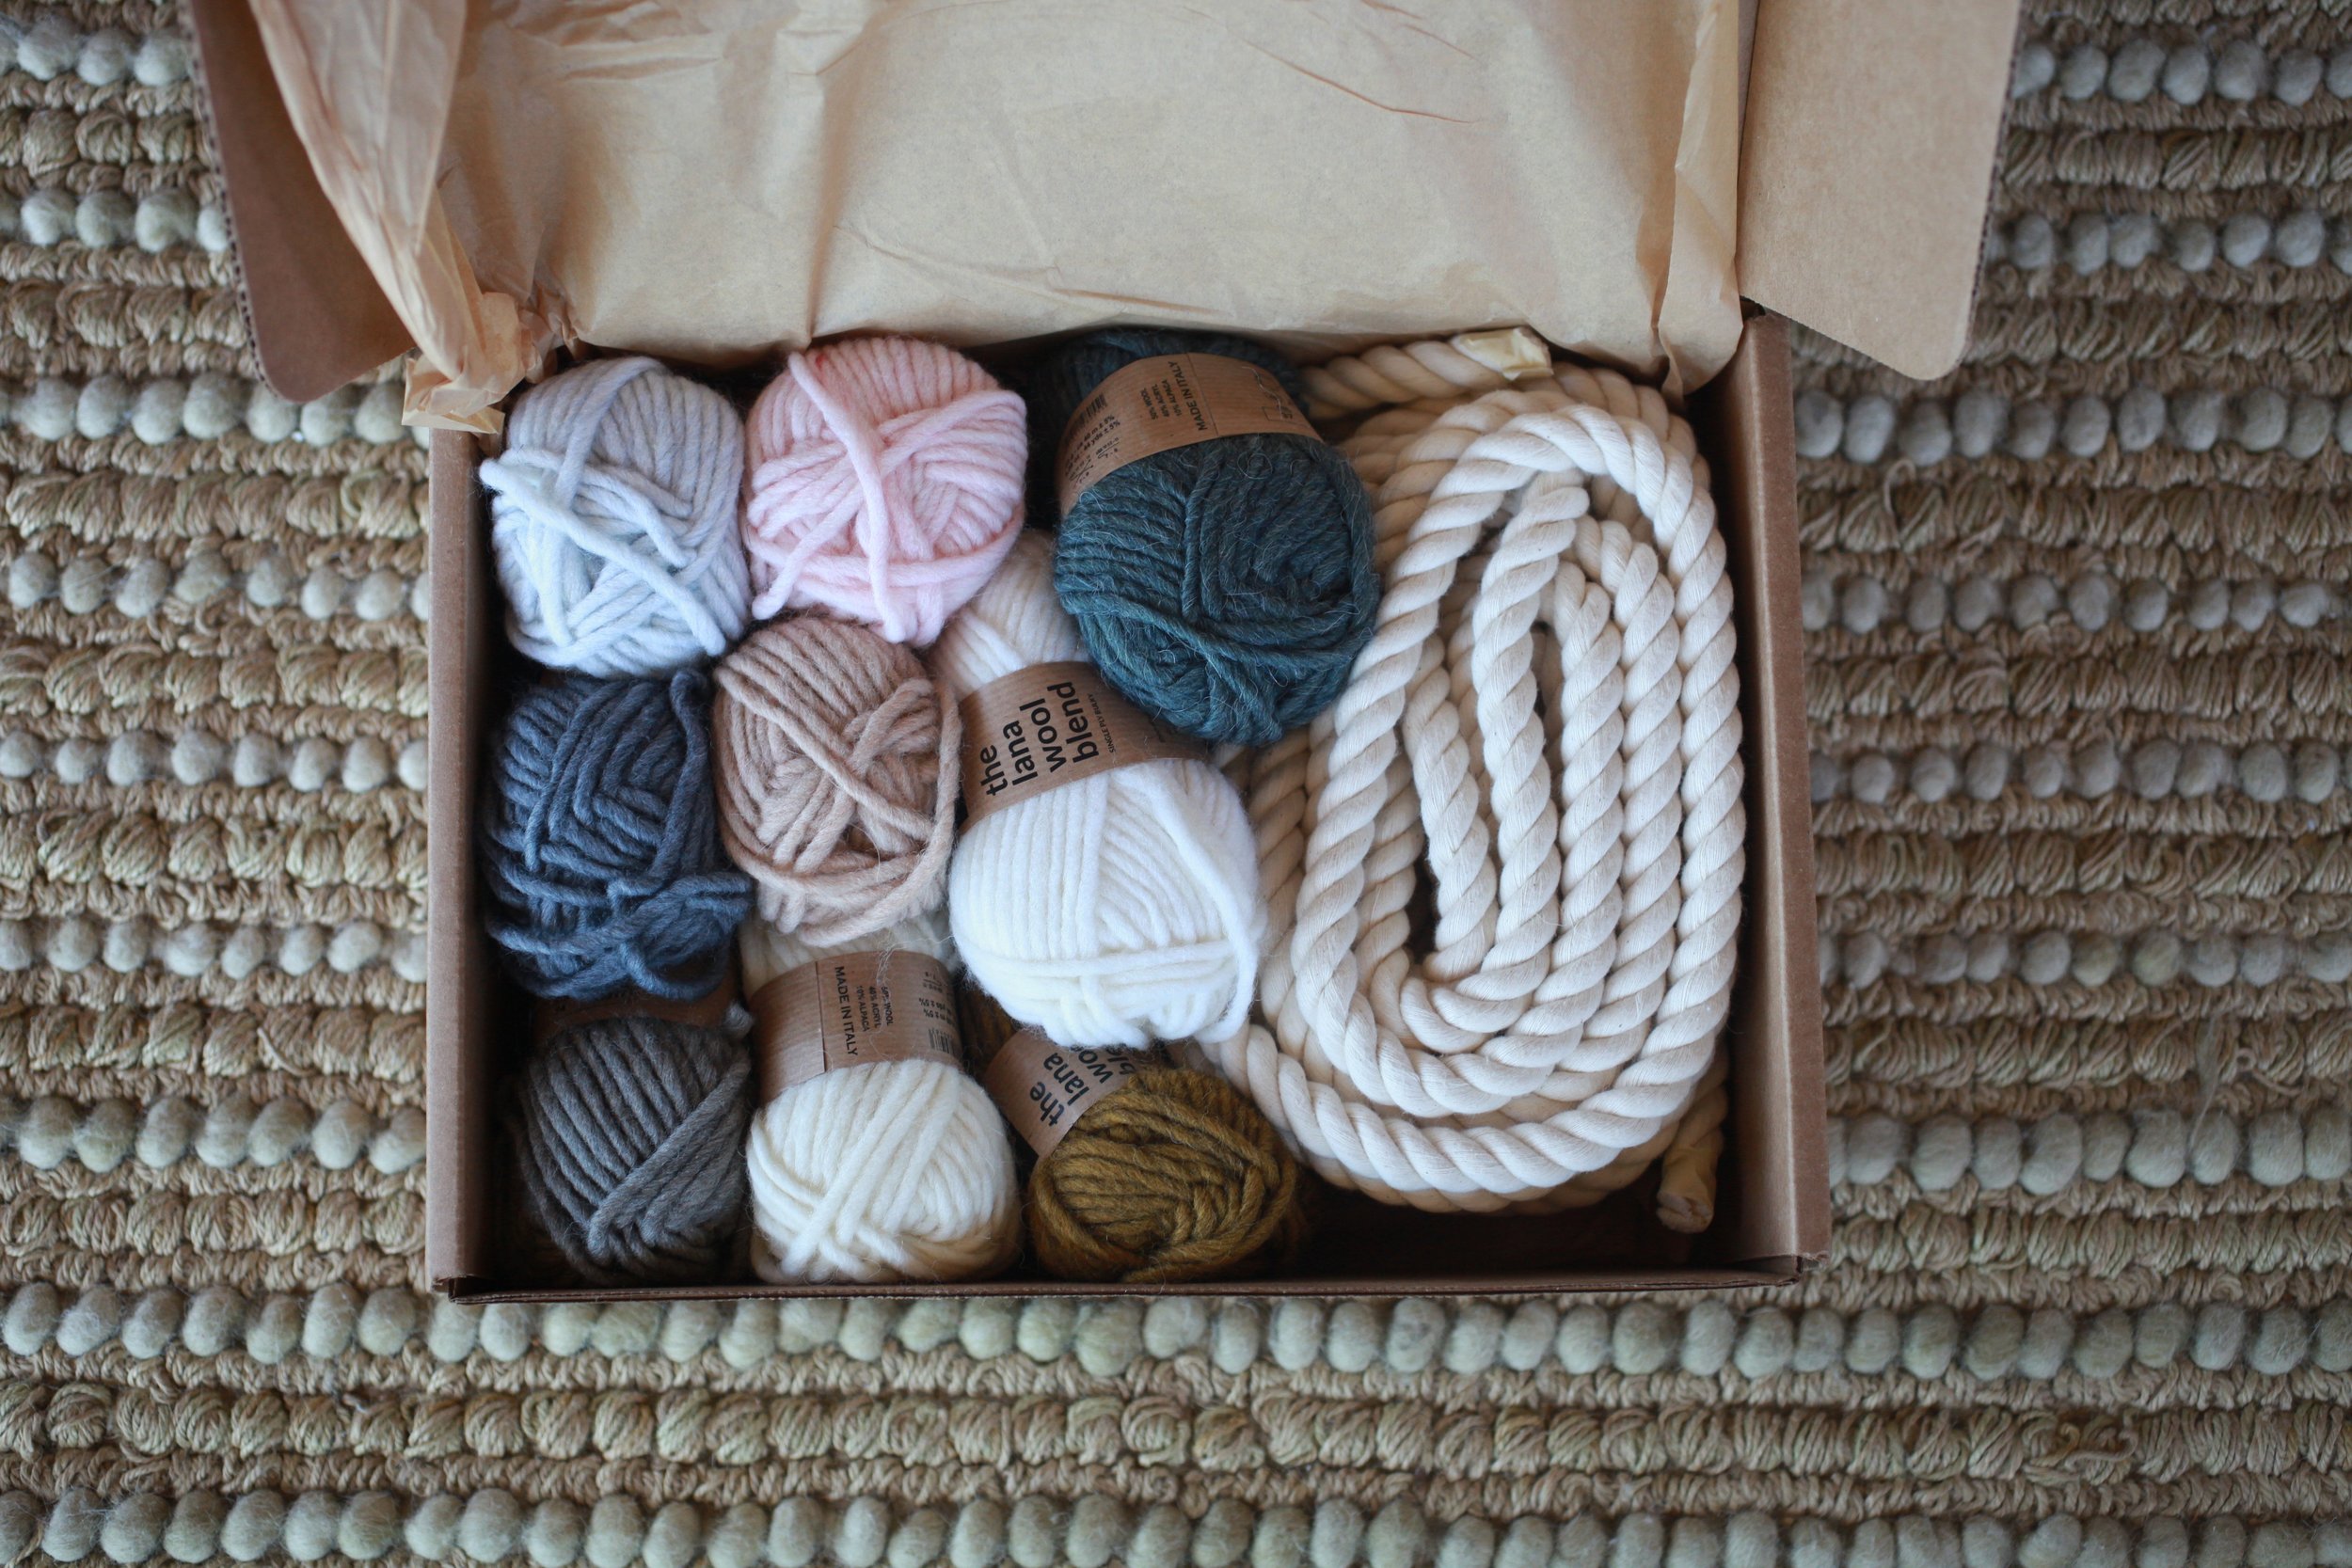 Cashmere Yarn in Dune, The Crafter's Box